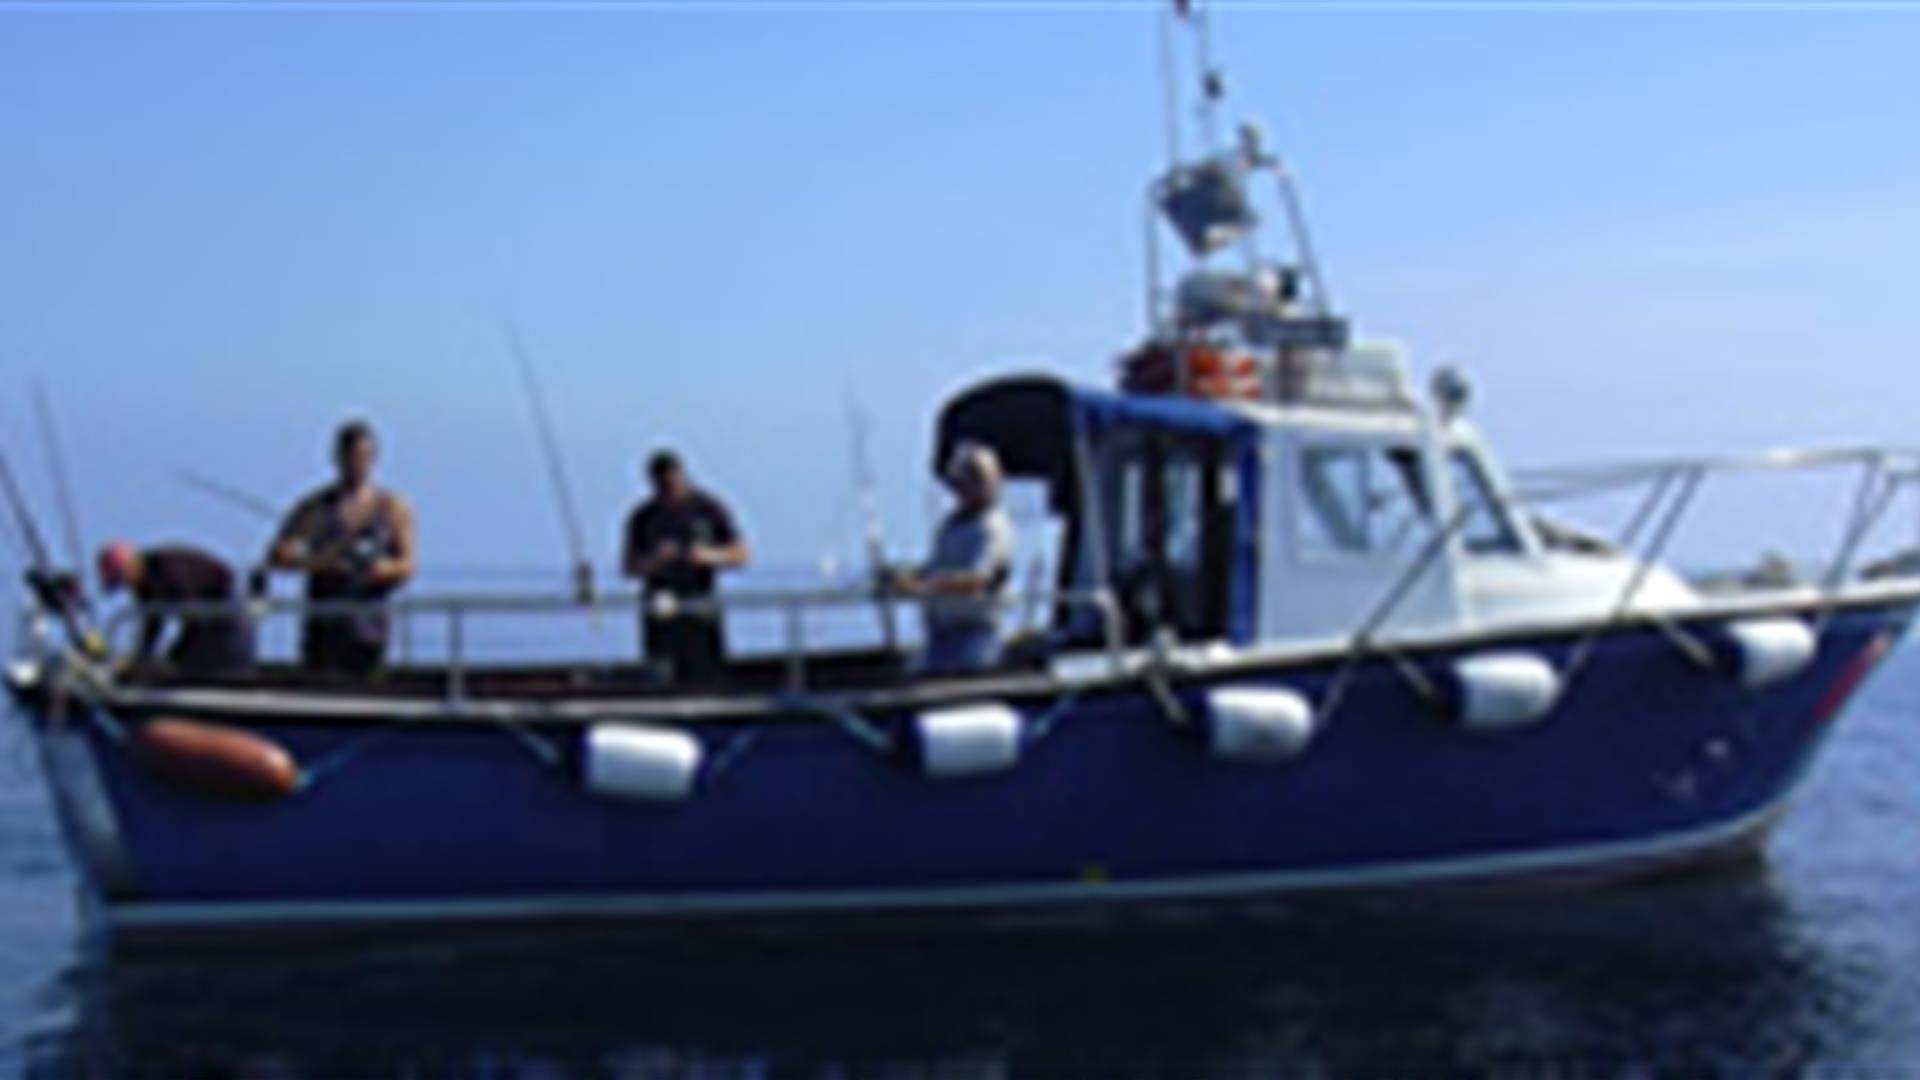 Pisces II: Sea Angling & Sightseeing on Carlingford Lough